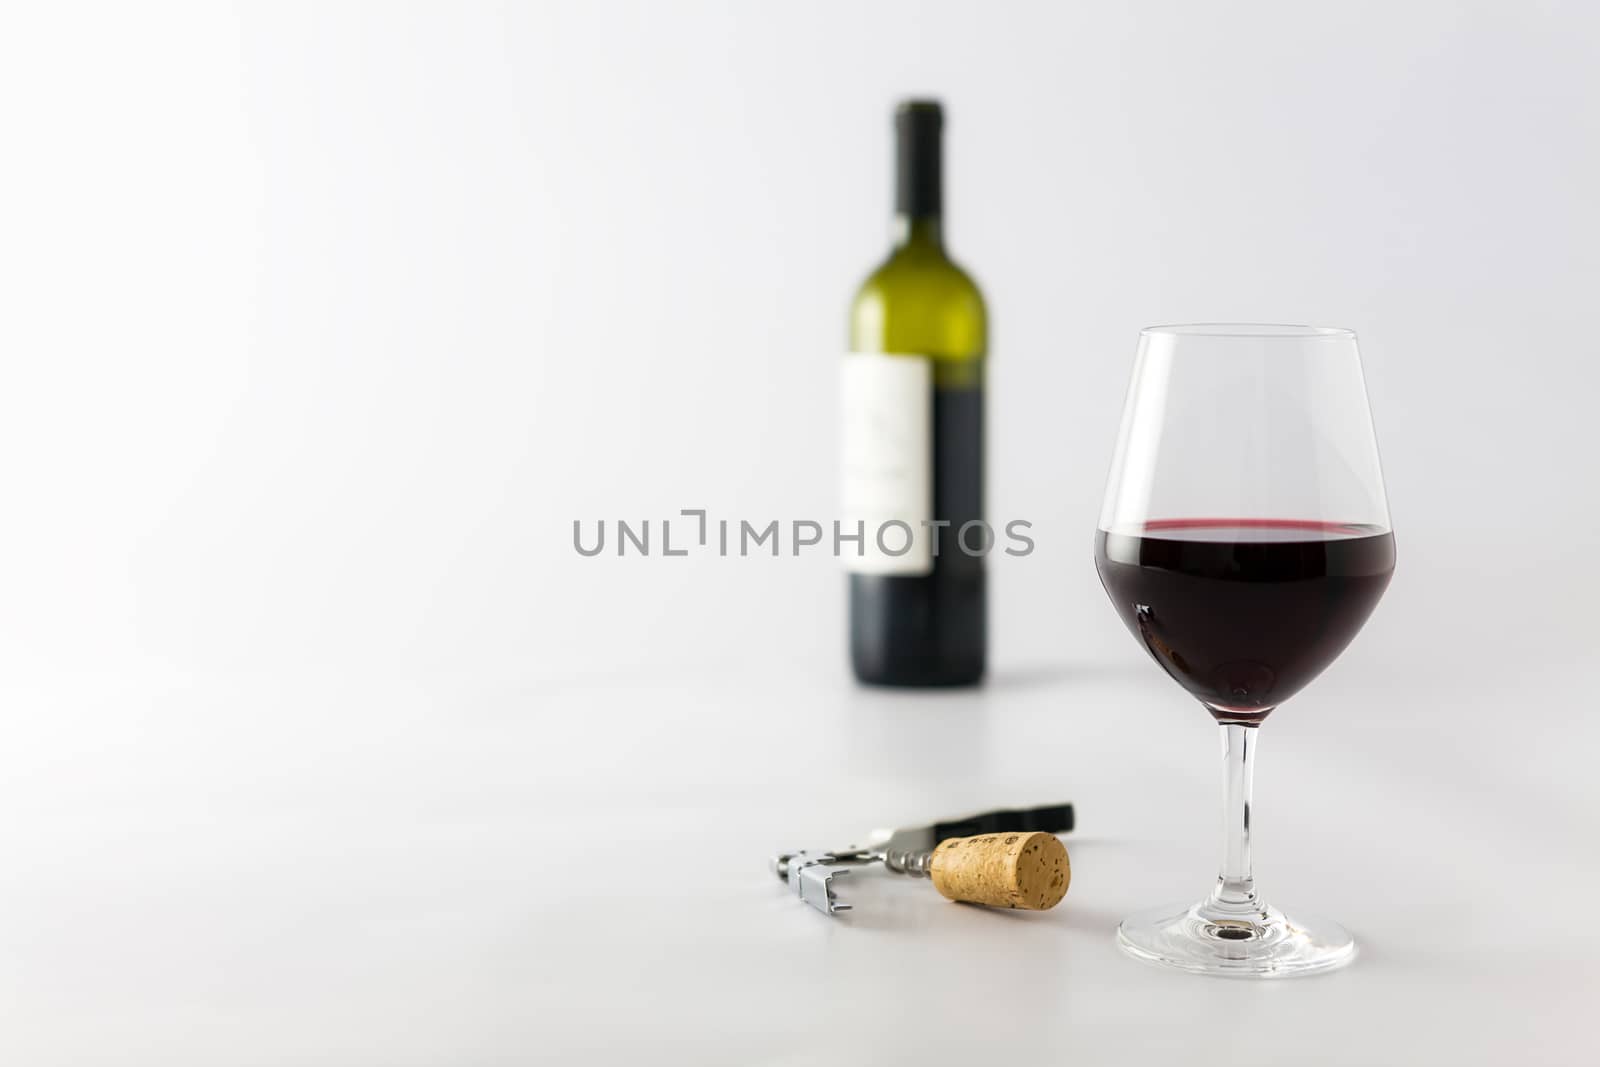 Glass of red wine and bottle by LuigiMorbidelli